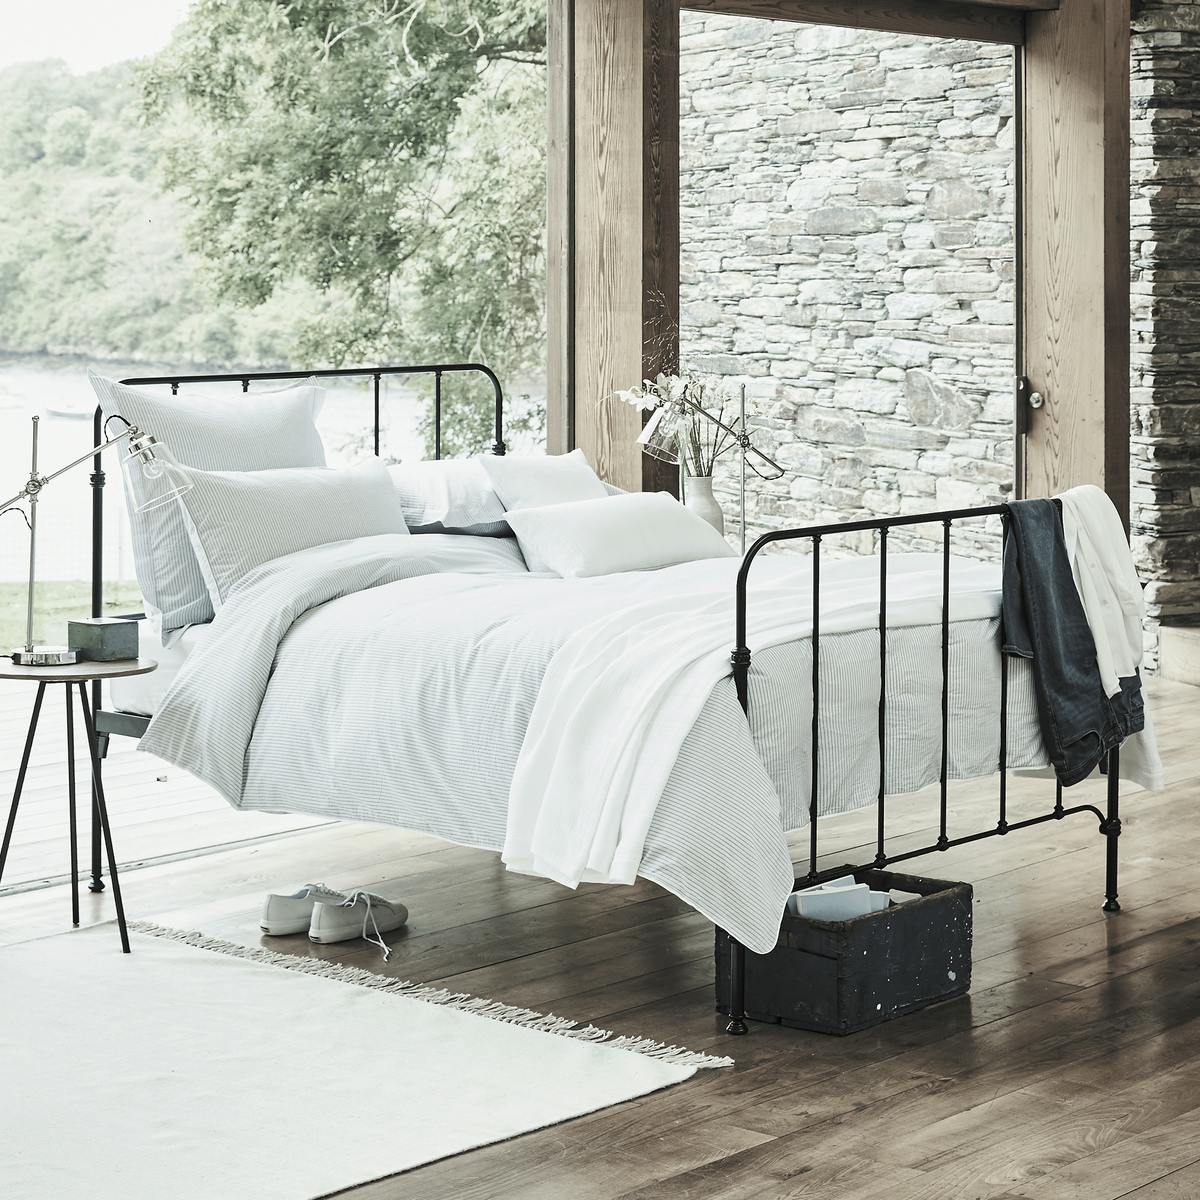 The White Company bed